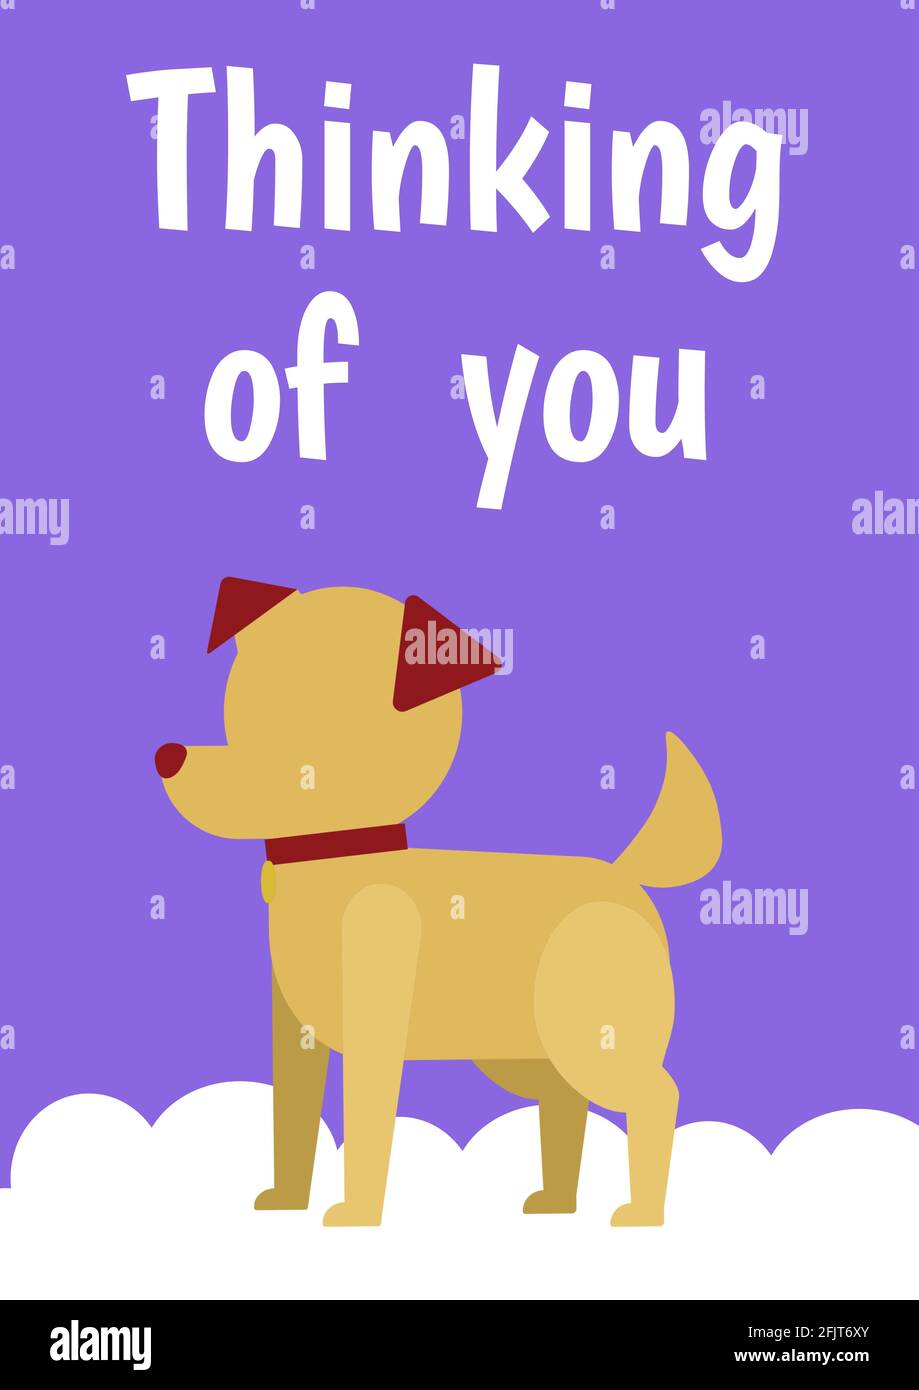 Thinking of you text over puppy dog standing on the cloud icon against blue background Stock Photo